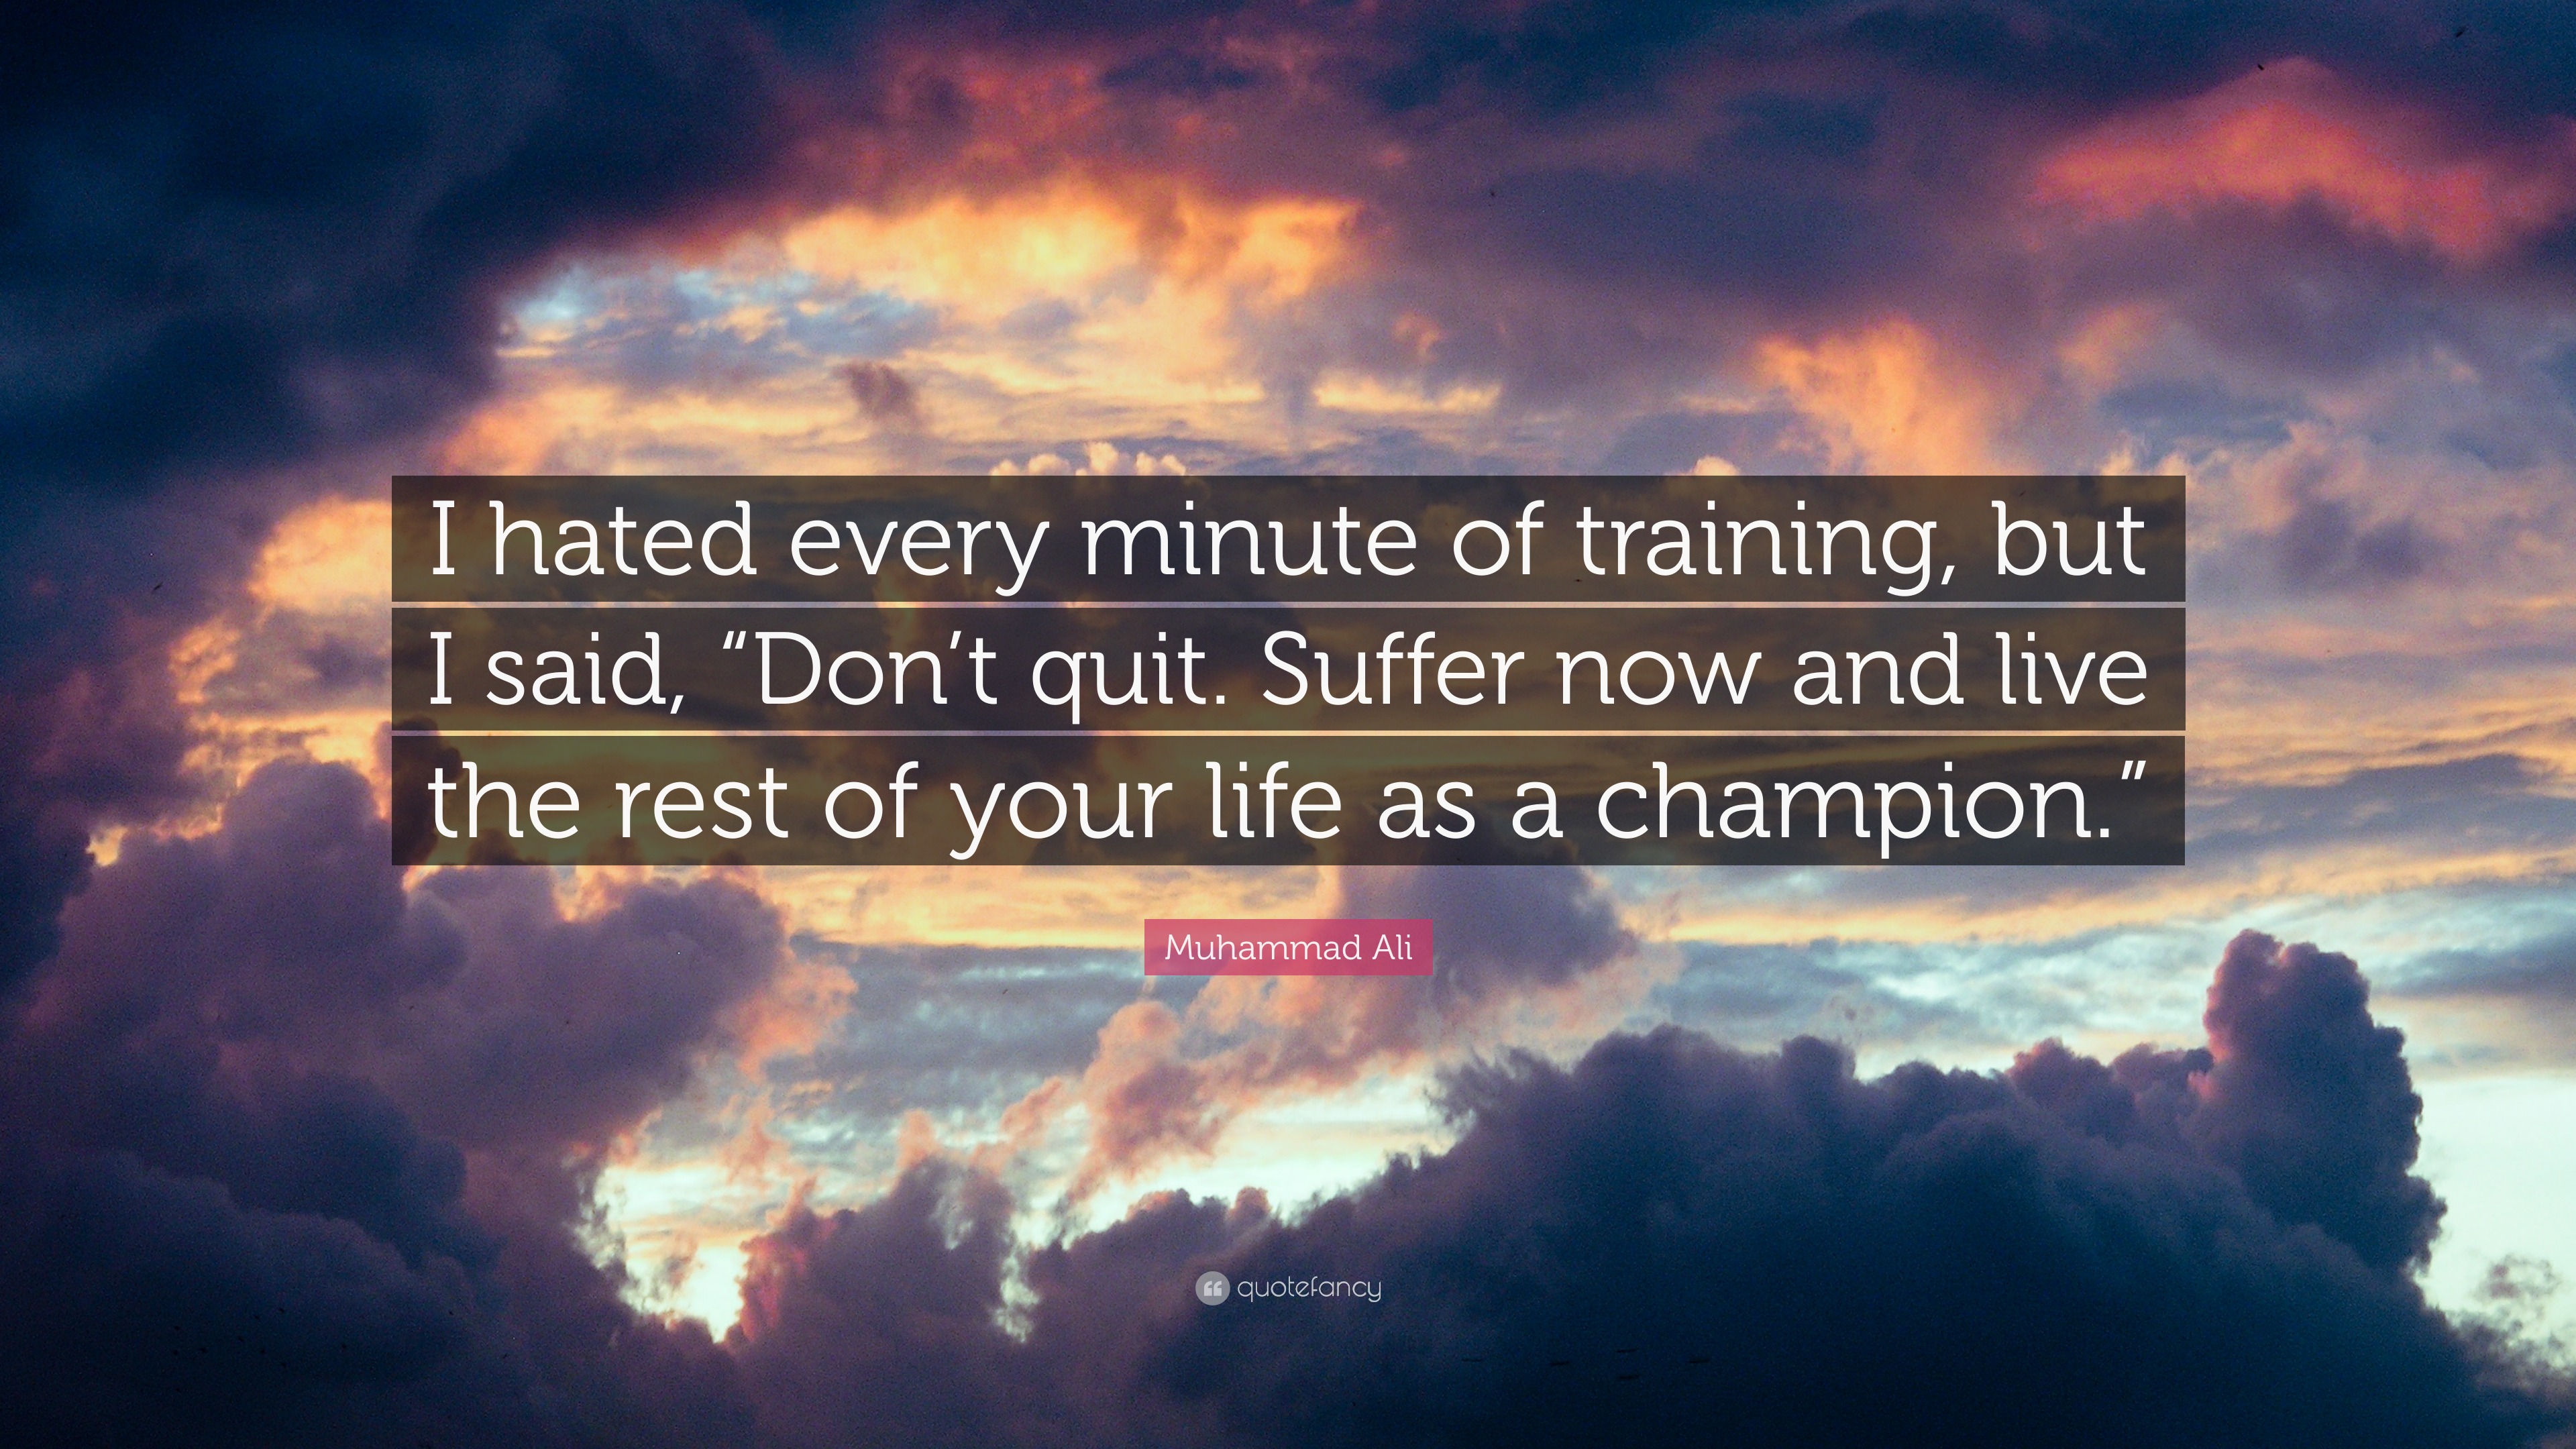 Muhammad Ali Quote: “I hated every minute of training, but I said, “Don't  quit. Suffer